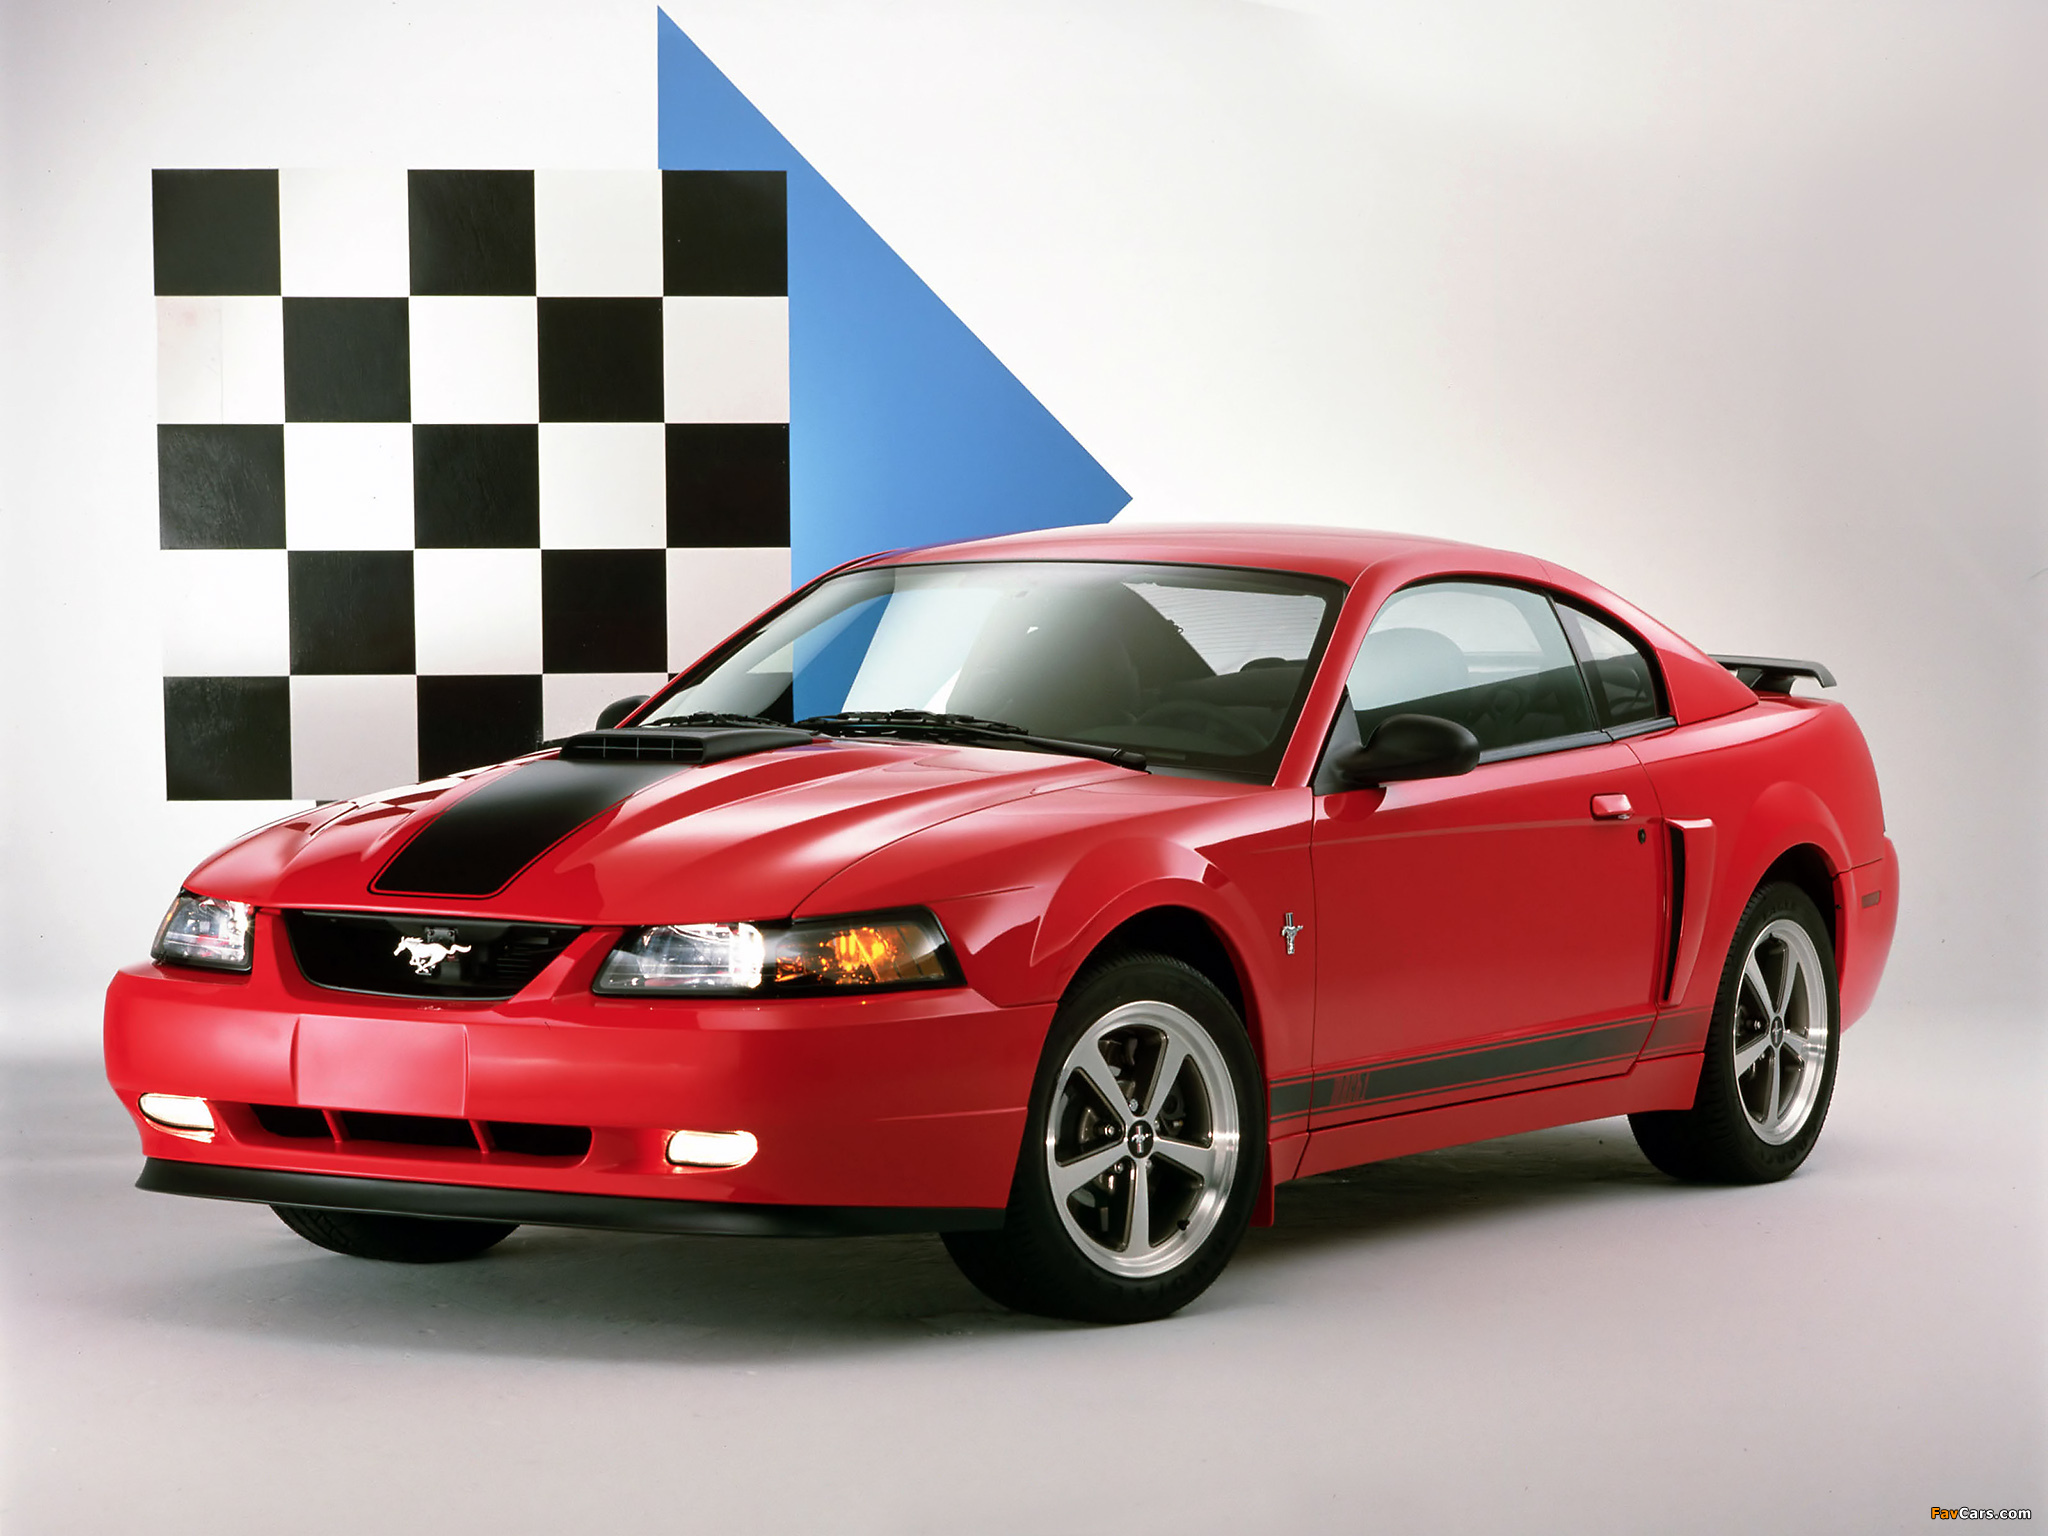 Mustang Evolution - Ford Mustang Web Site with Mustang ...